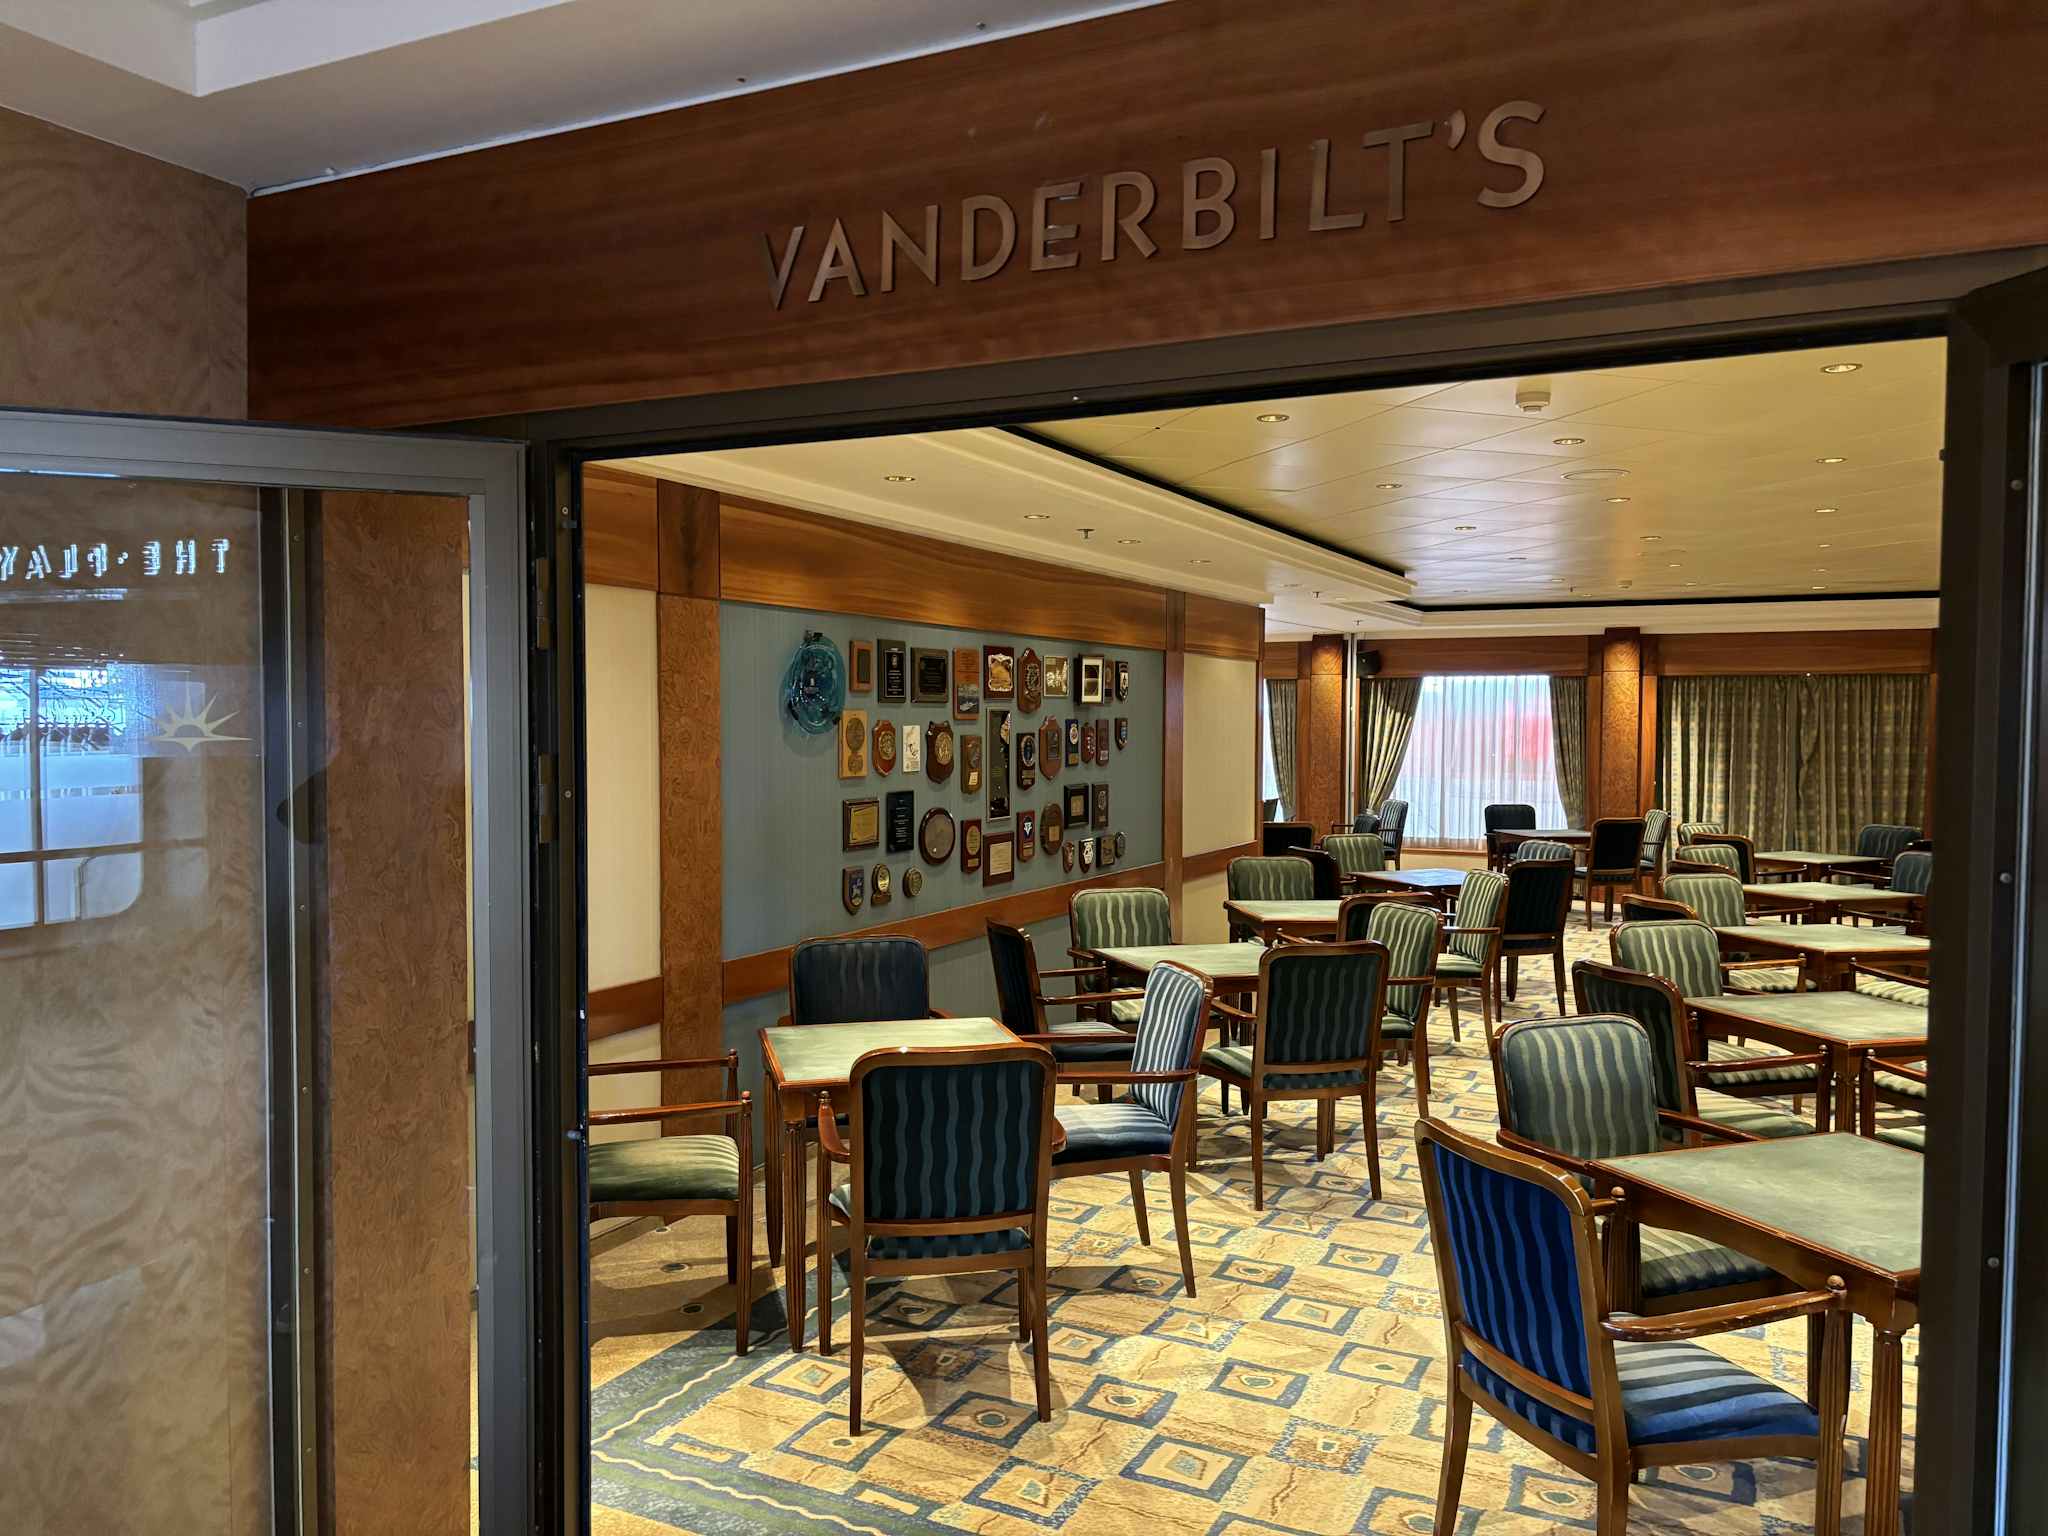 Vanderbilt's is a quiet room set aside mainly for cards on P&O Cruises Aurora